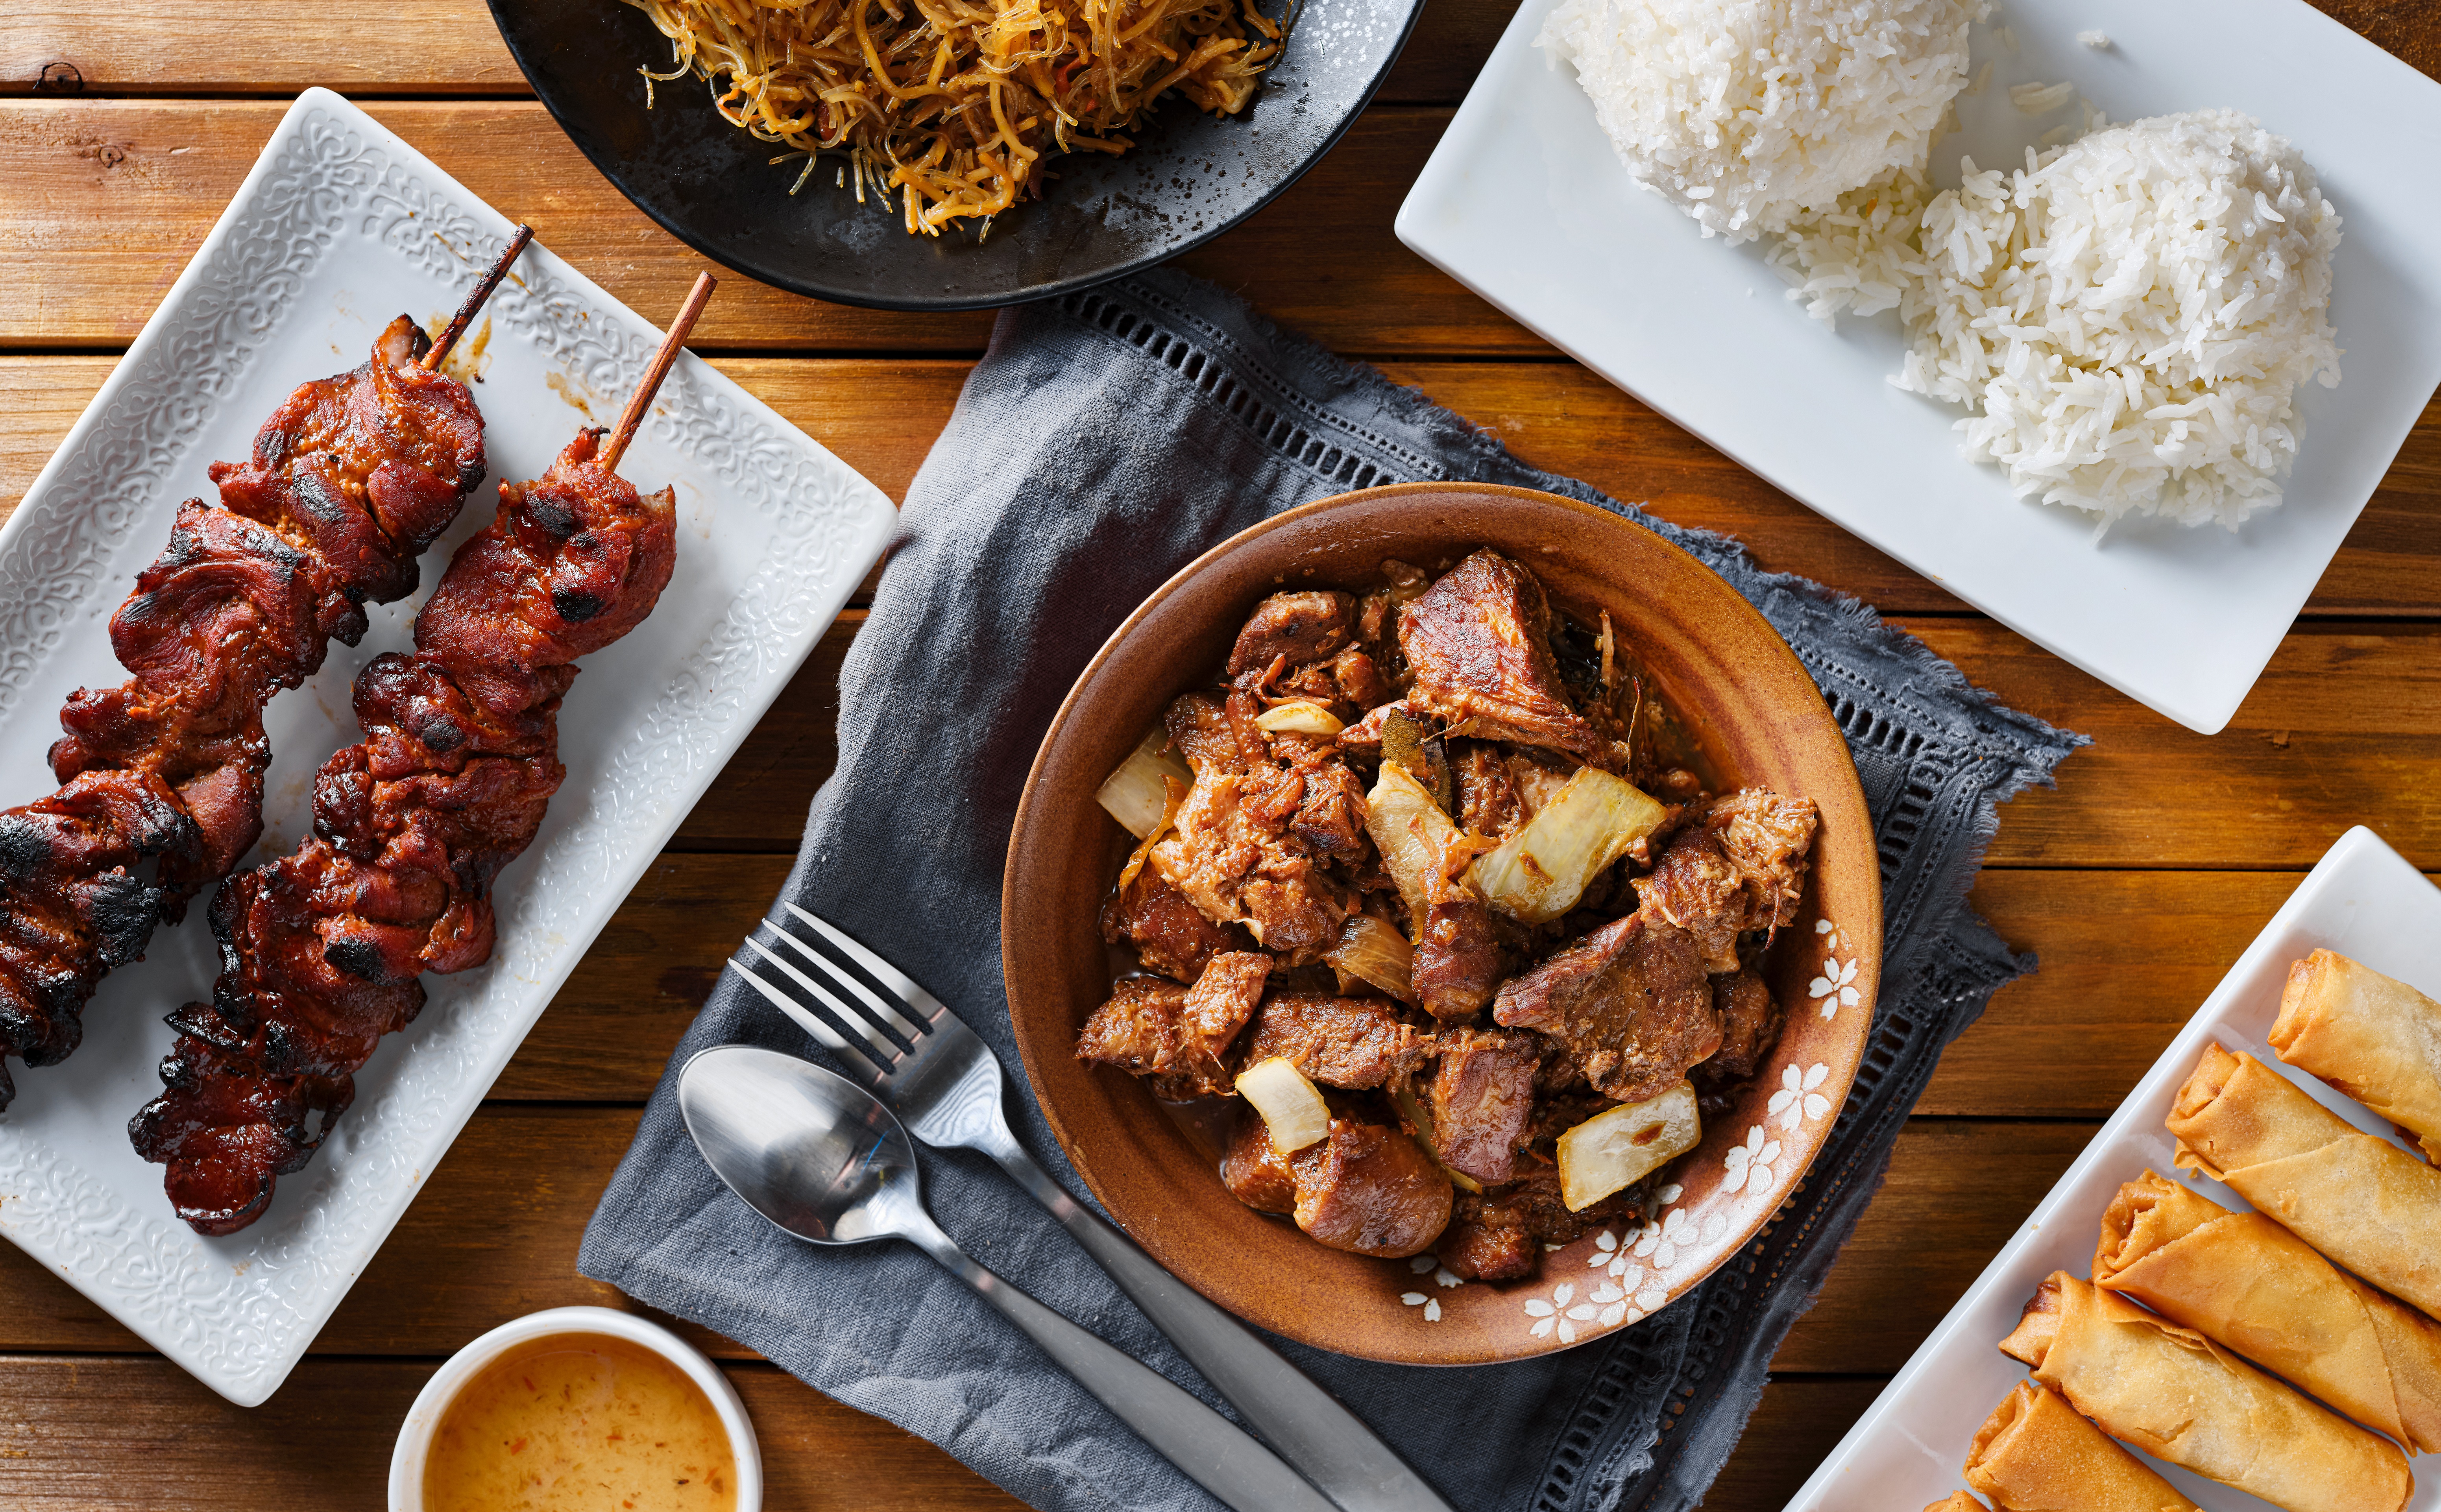 pork adobo meal with filipino foods such as lumpia, pancit noodles, and rice